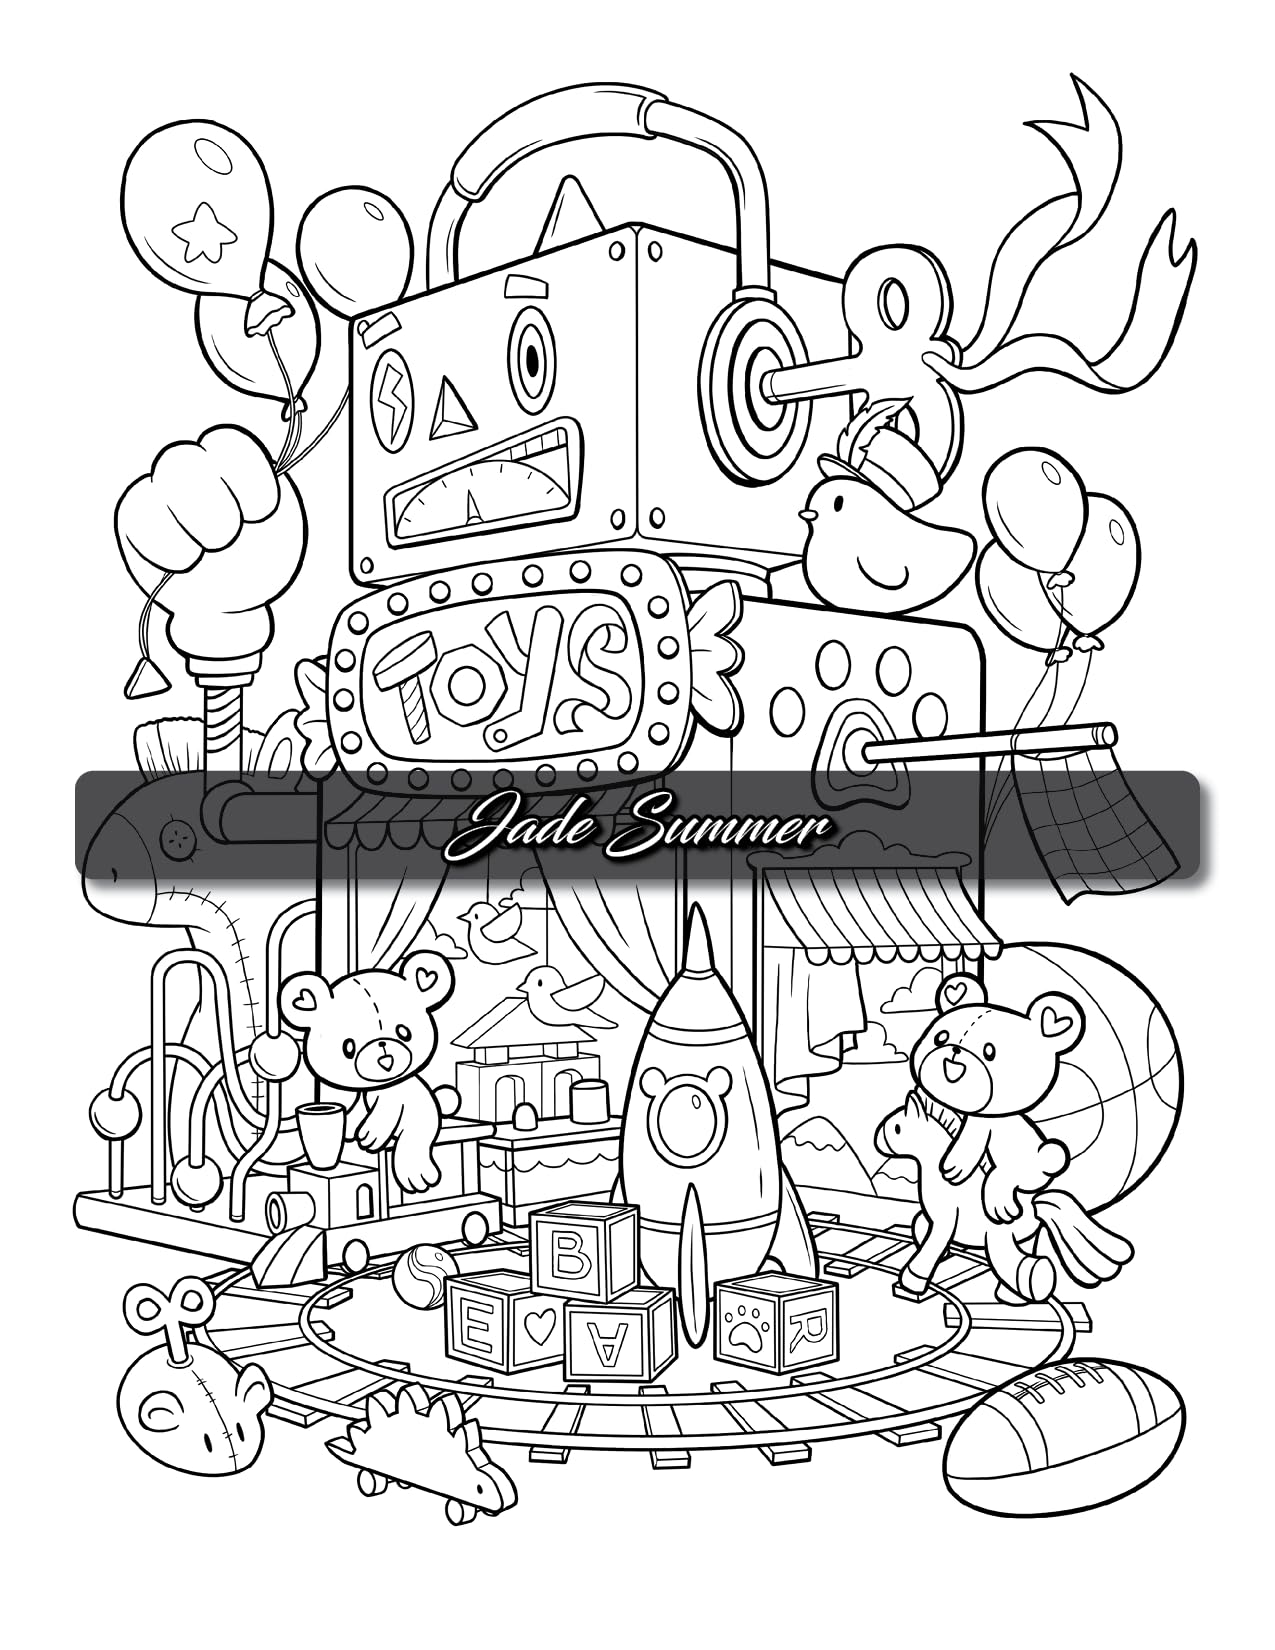 Kawaii Town: Coloring Book with Cute Animals, Tiny Buildings, and Playful Scenes for Stress Relief and Relaxation